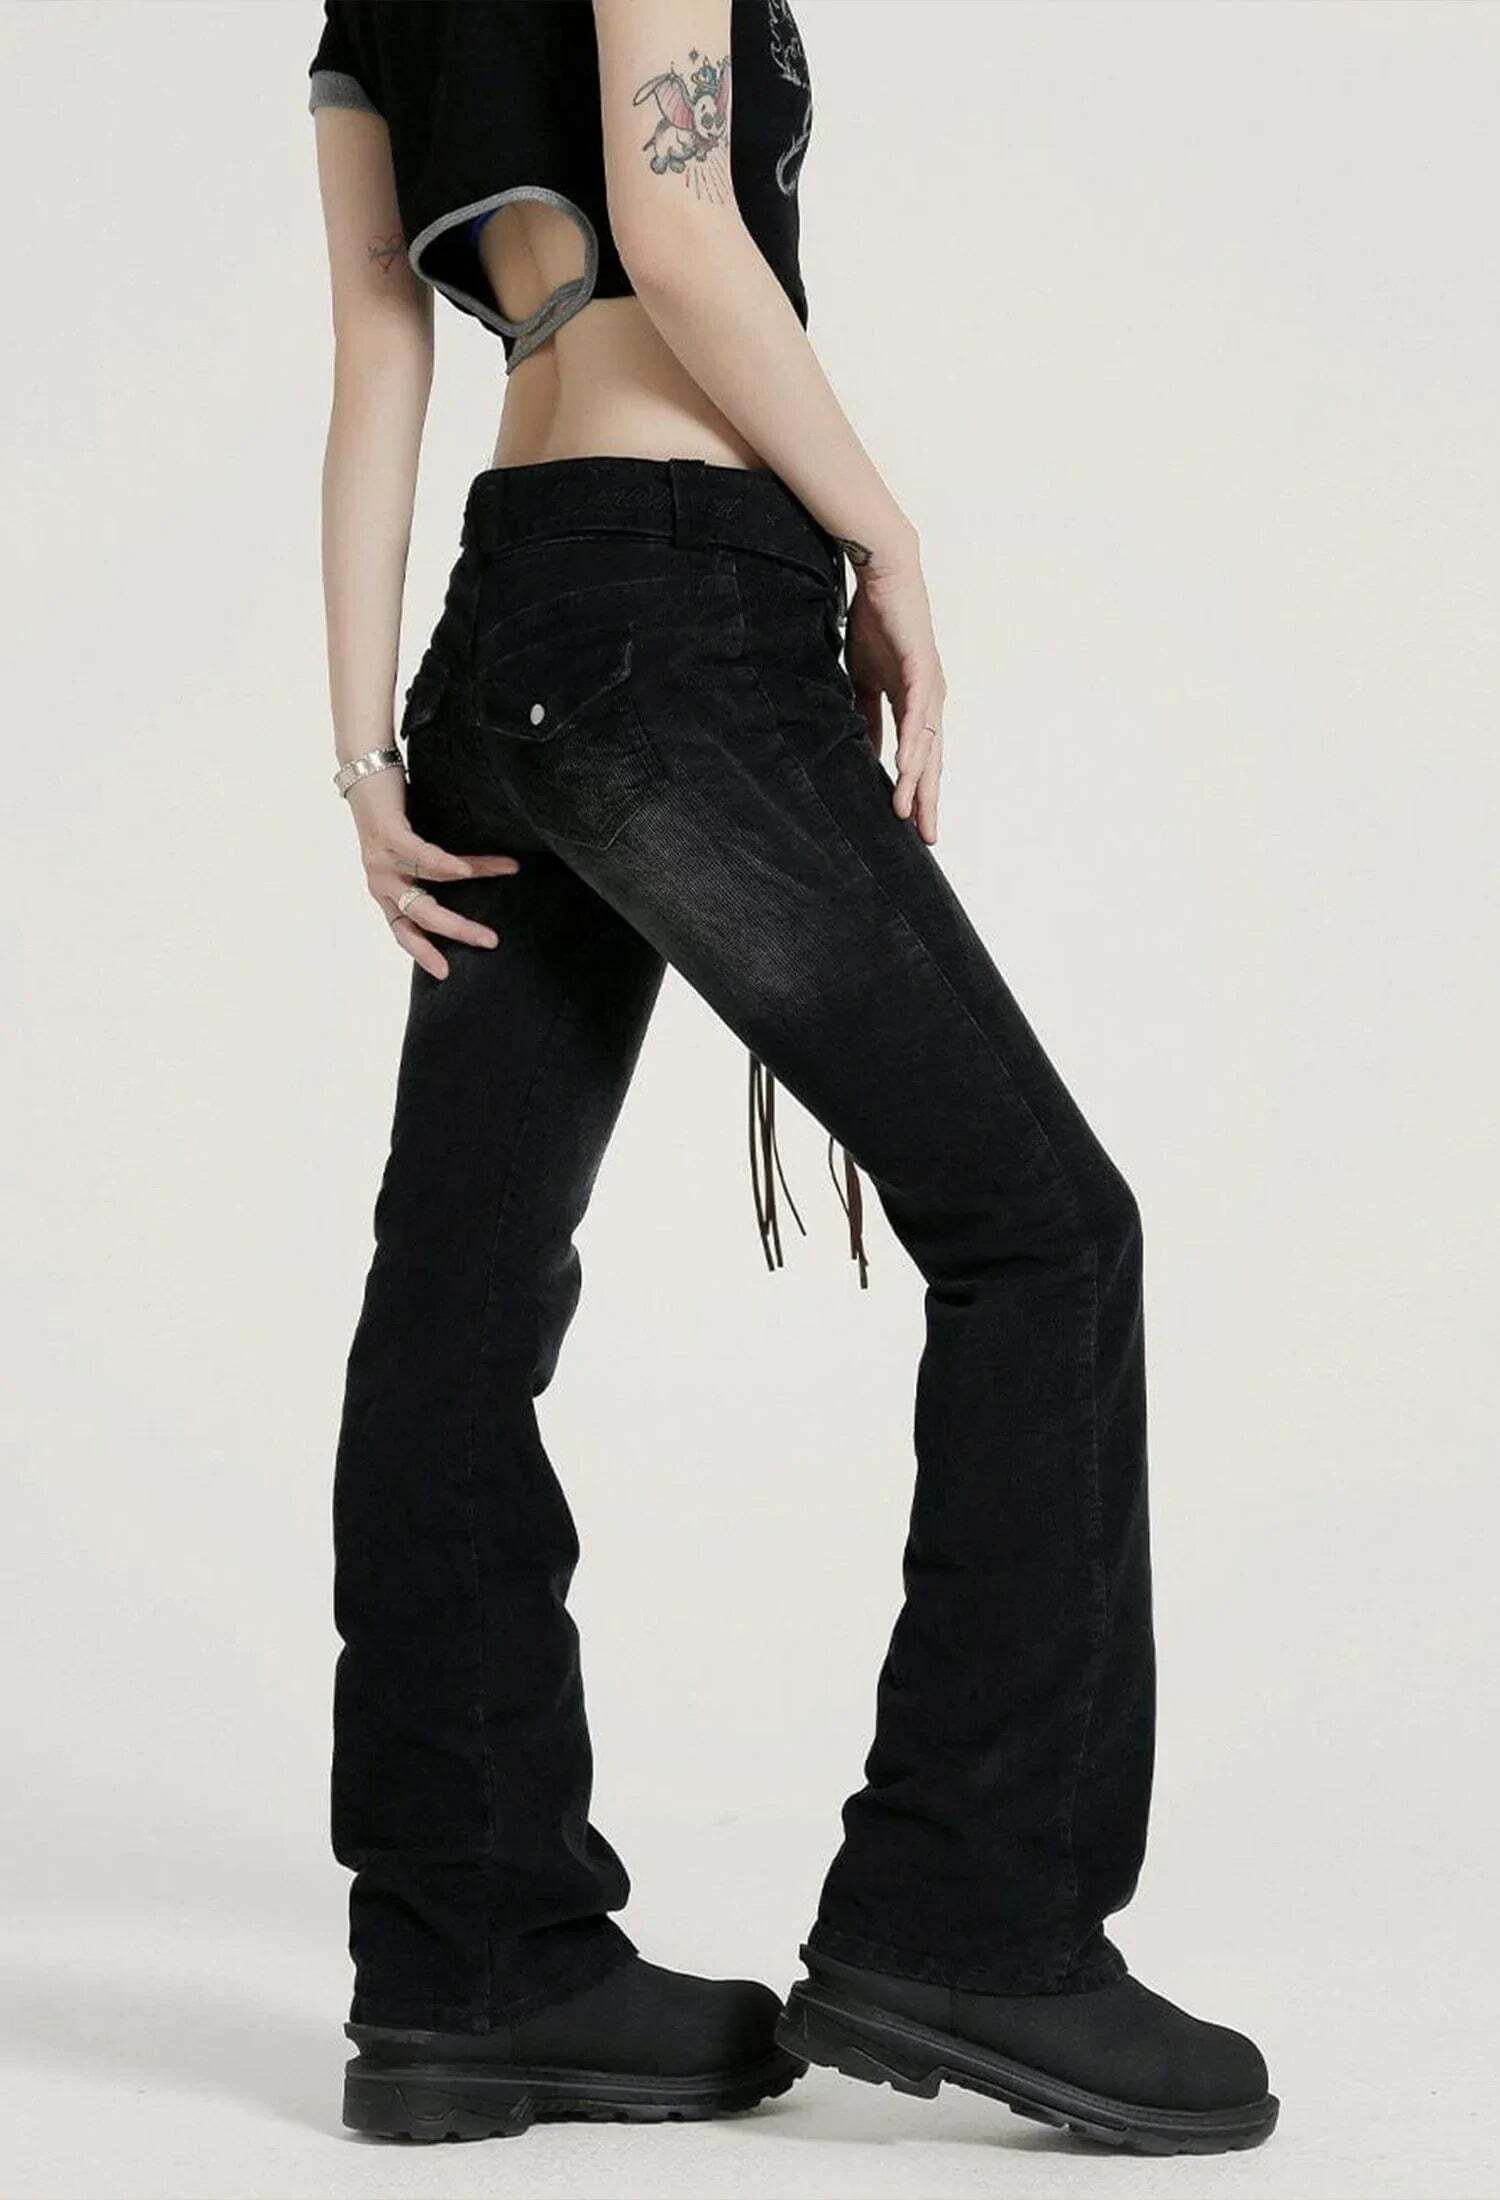 laceup flared jeans edgy streetwear essential 8902